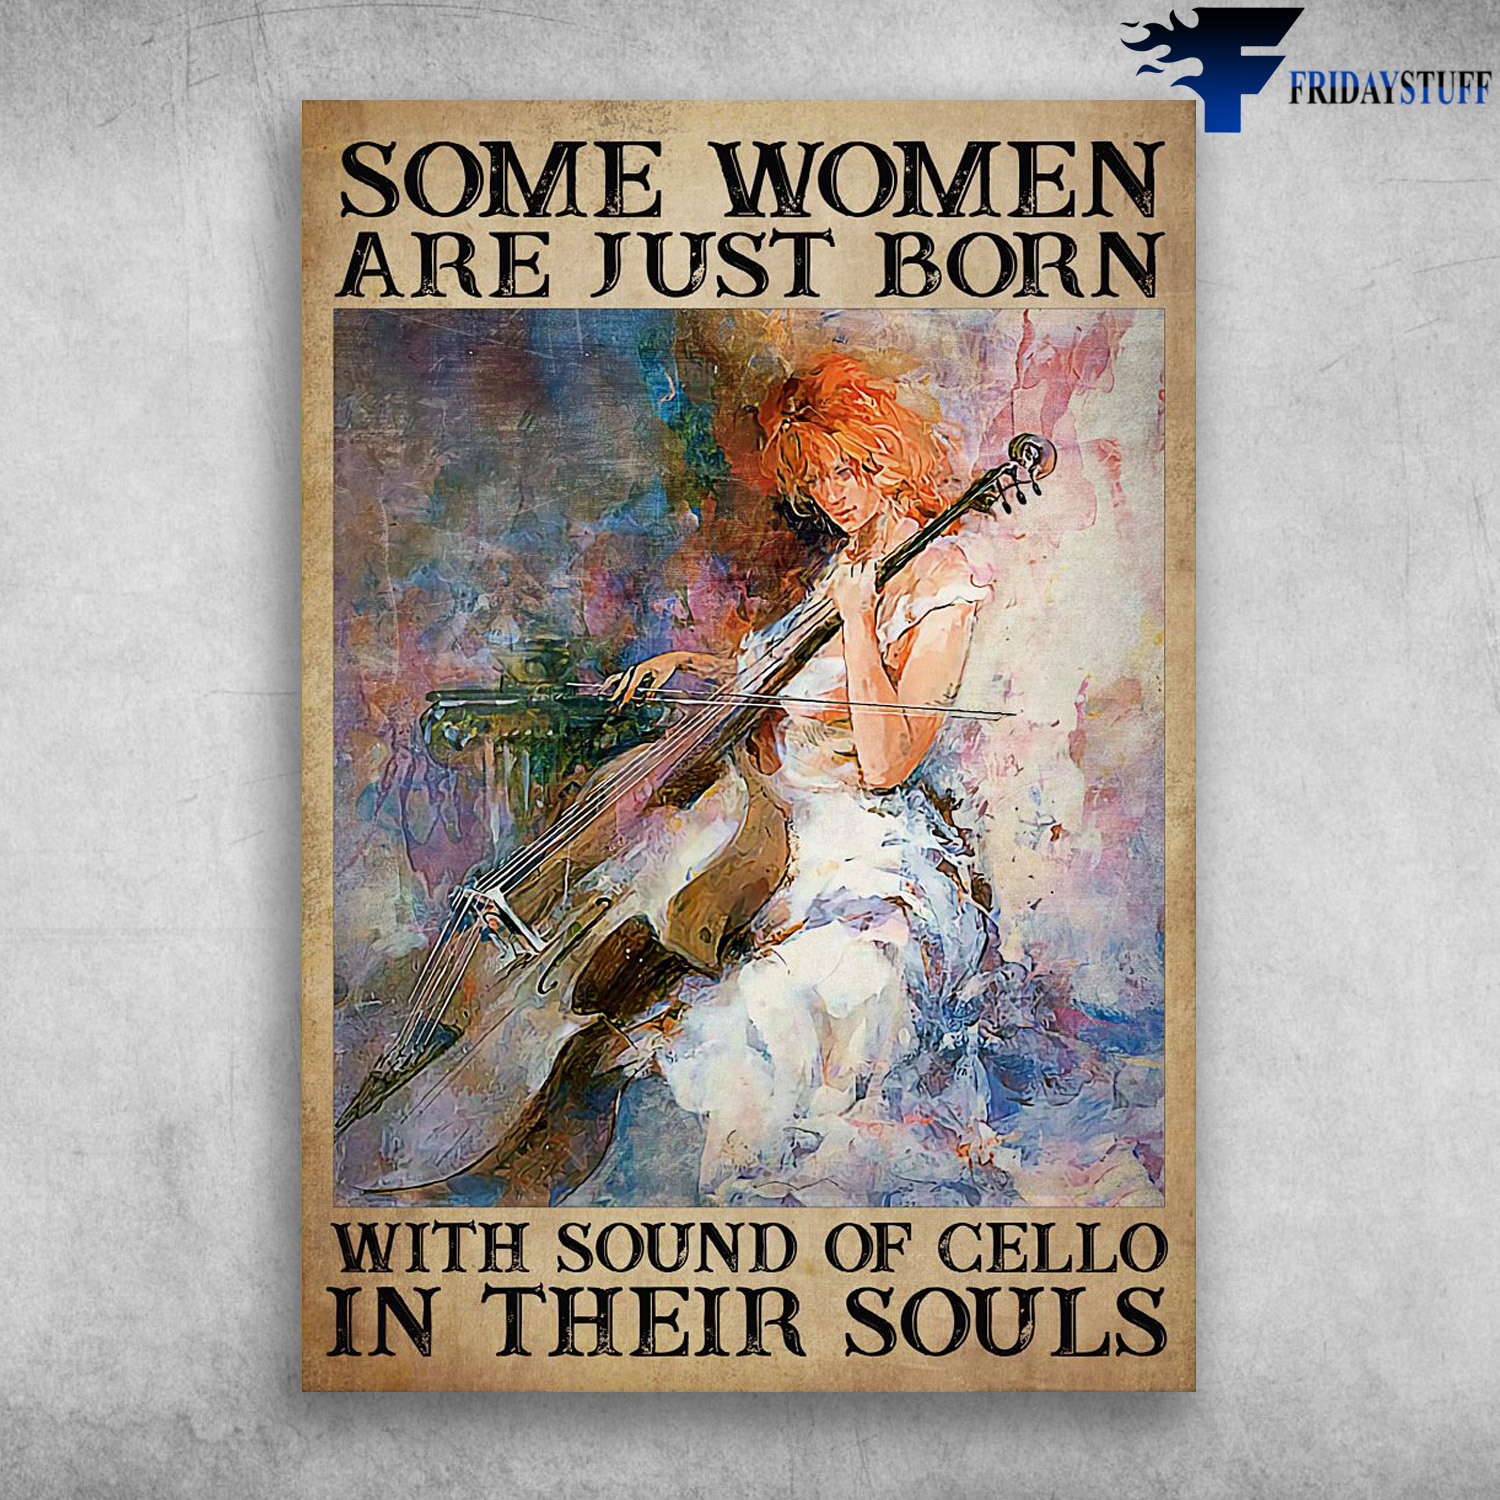 Girl Playing Cello - Some Women Are Just Born, With Sound Of Cello, In Their Soul